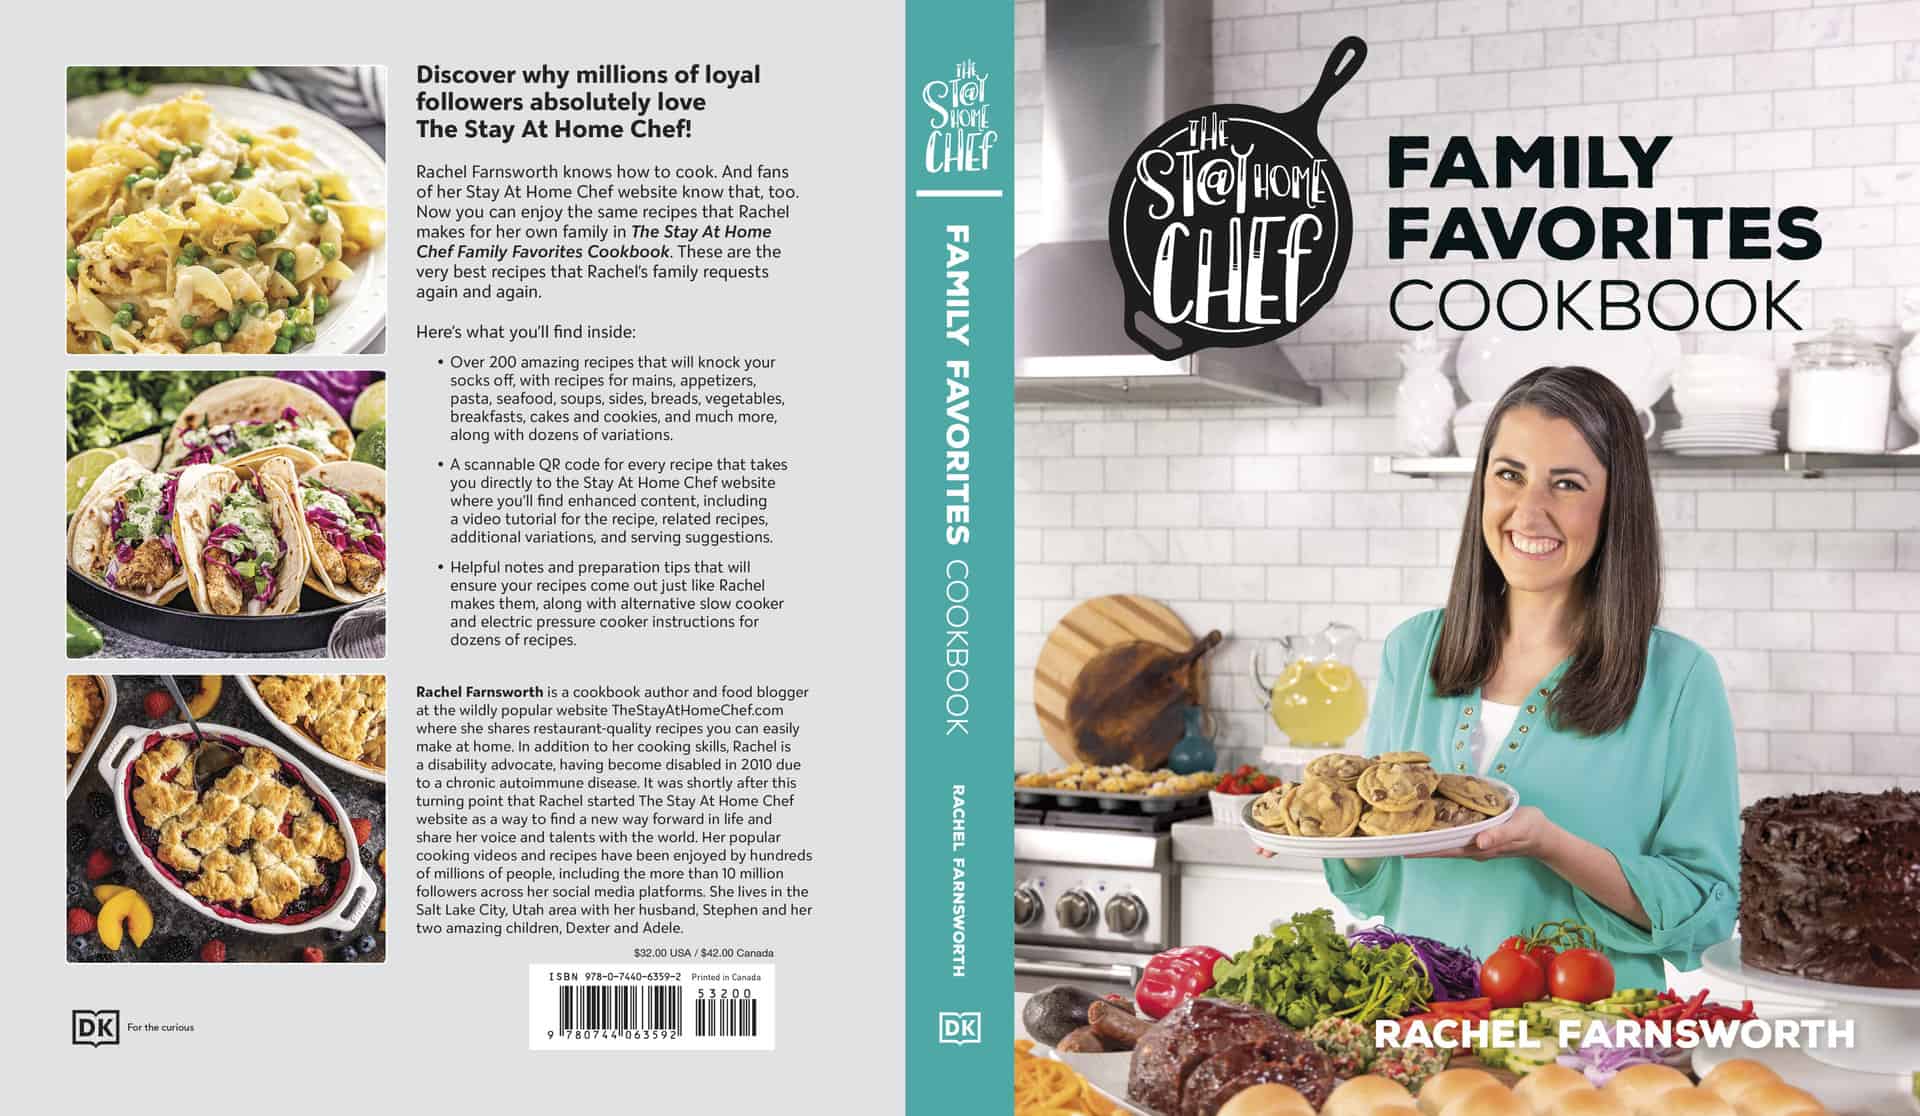 Cookbook cover and back cover for The Stay At Home Chef Family Favorites Cookbook featuring Rachel holding a plate of chocolate chip cookies surrounded by other prepared recipes from the book.